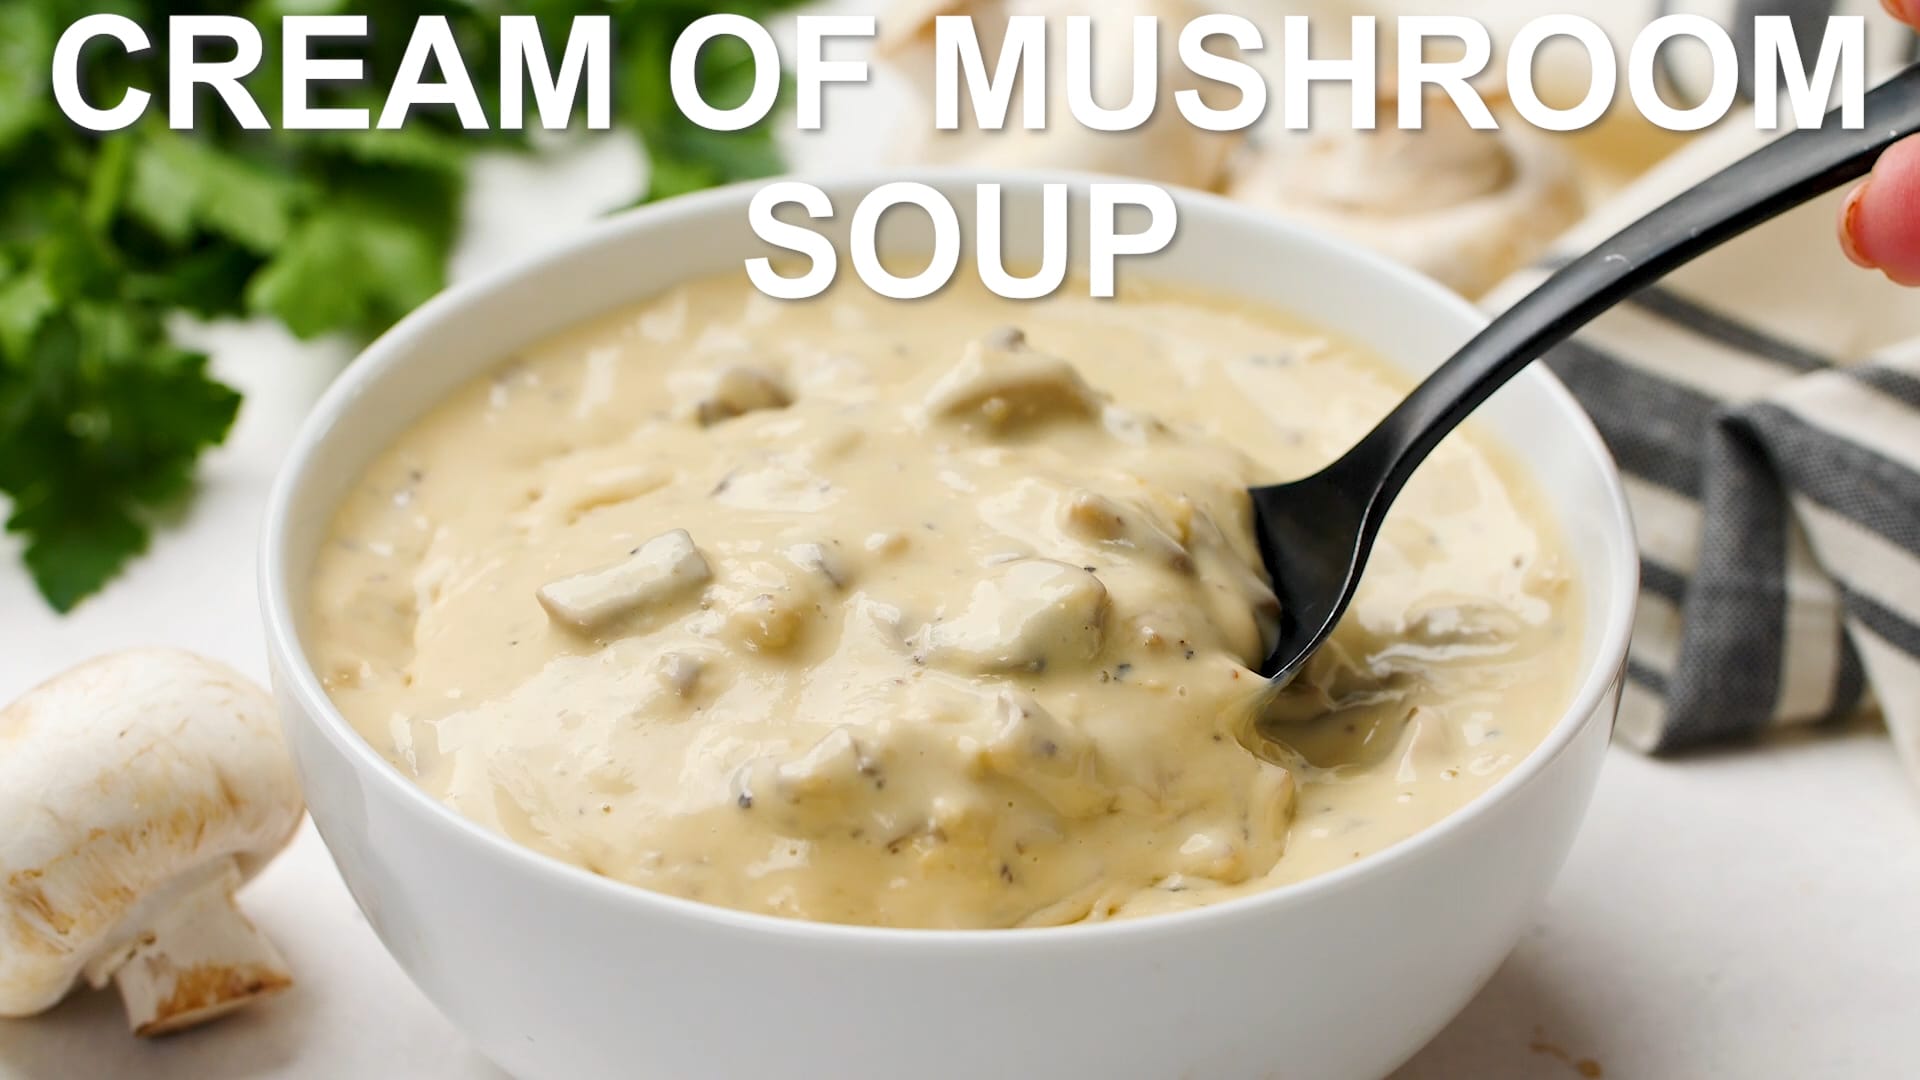   Fresh, Condensed Cream of Mushroom Soup, 10.5 Oz  (Previously Happy Belly, Packaging May Vary) : Grocery & Gourmet Food